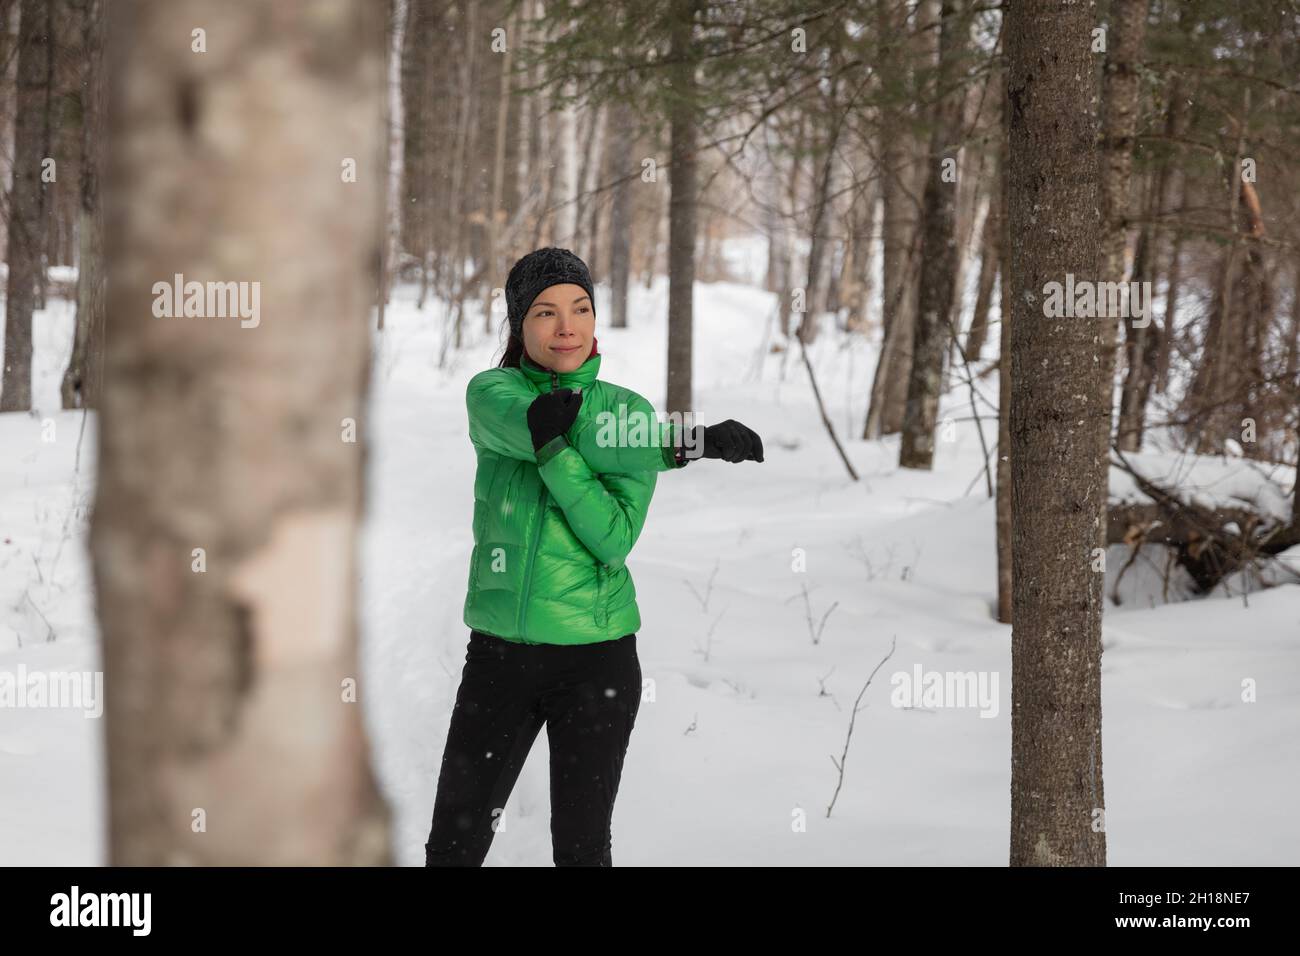 Winter fitness athlete woman warming up stretching arms before her outdoor run running on snow trail. Asian runner wearing cold weather gloves Stock Photo